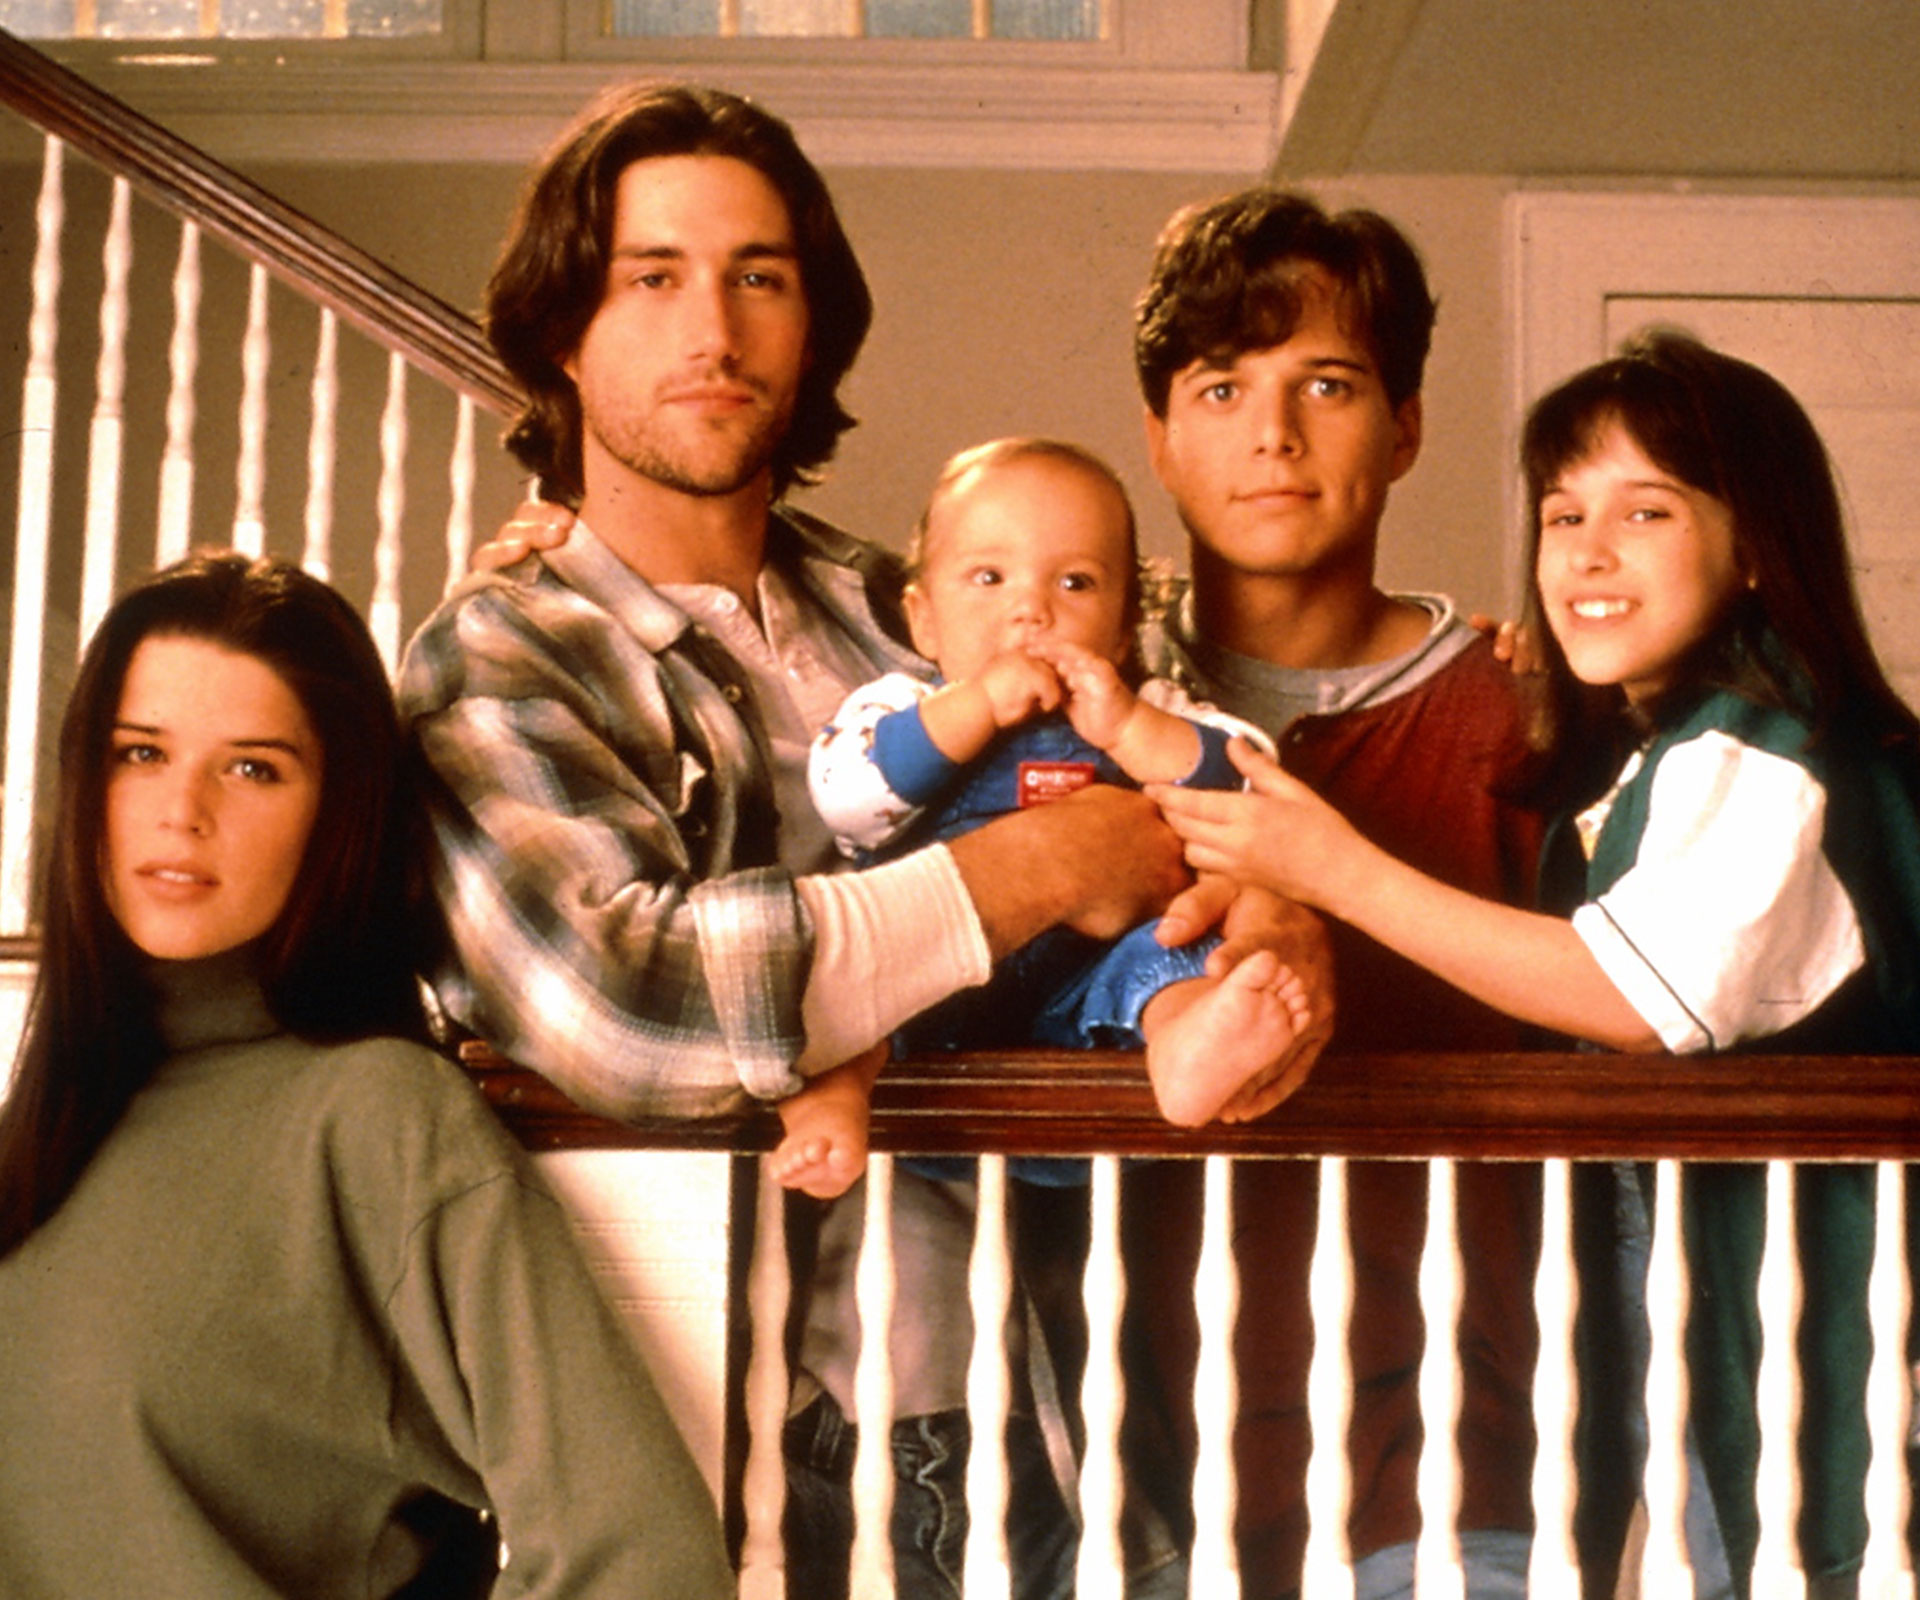 Party Of Five cast